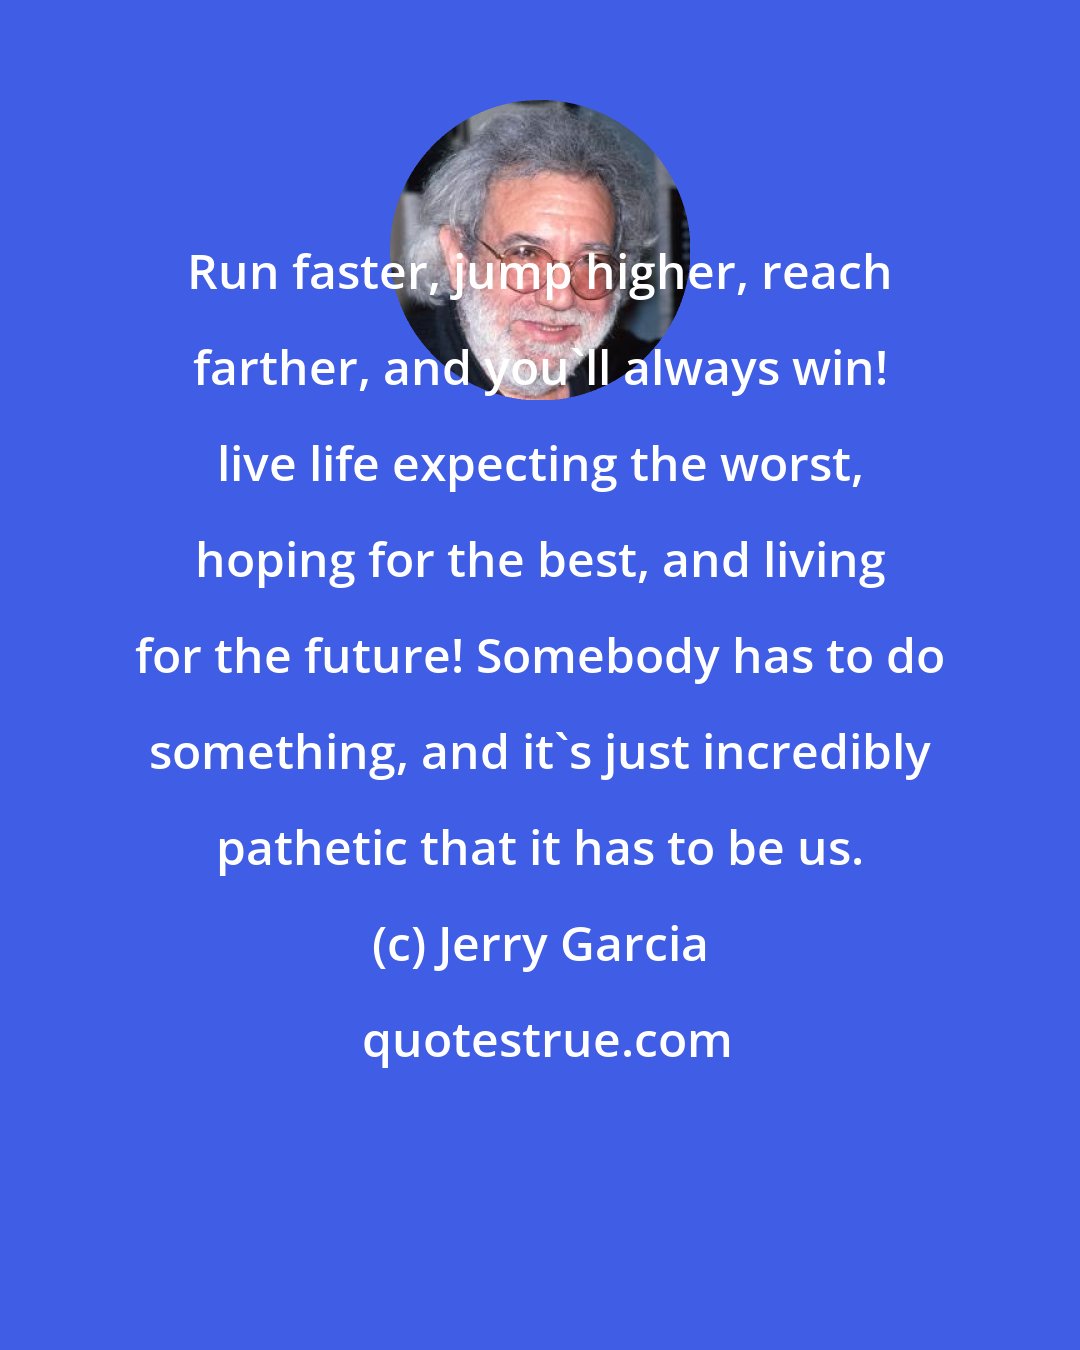 Jerry Garcia: Run faster, jump higher, reach farther, and you'll always win! live life expecting the worst, hoping for the best, and living for the future! Somebody has to do something, and it's just incredibly pathetic that it has to be us.